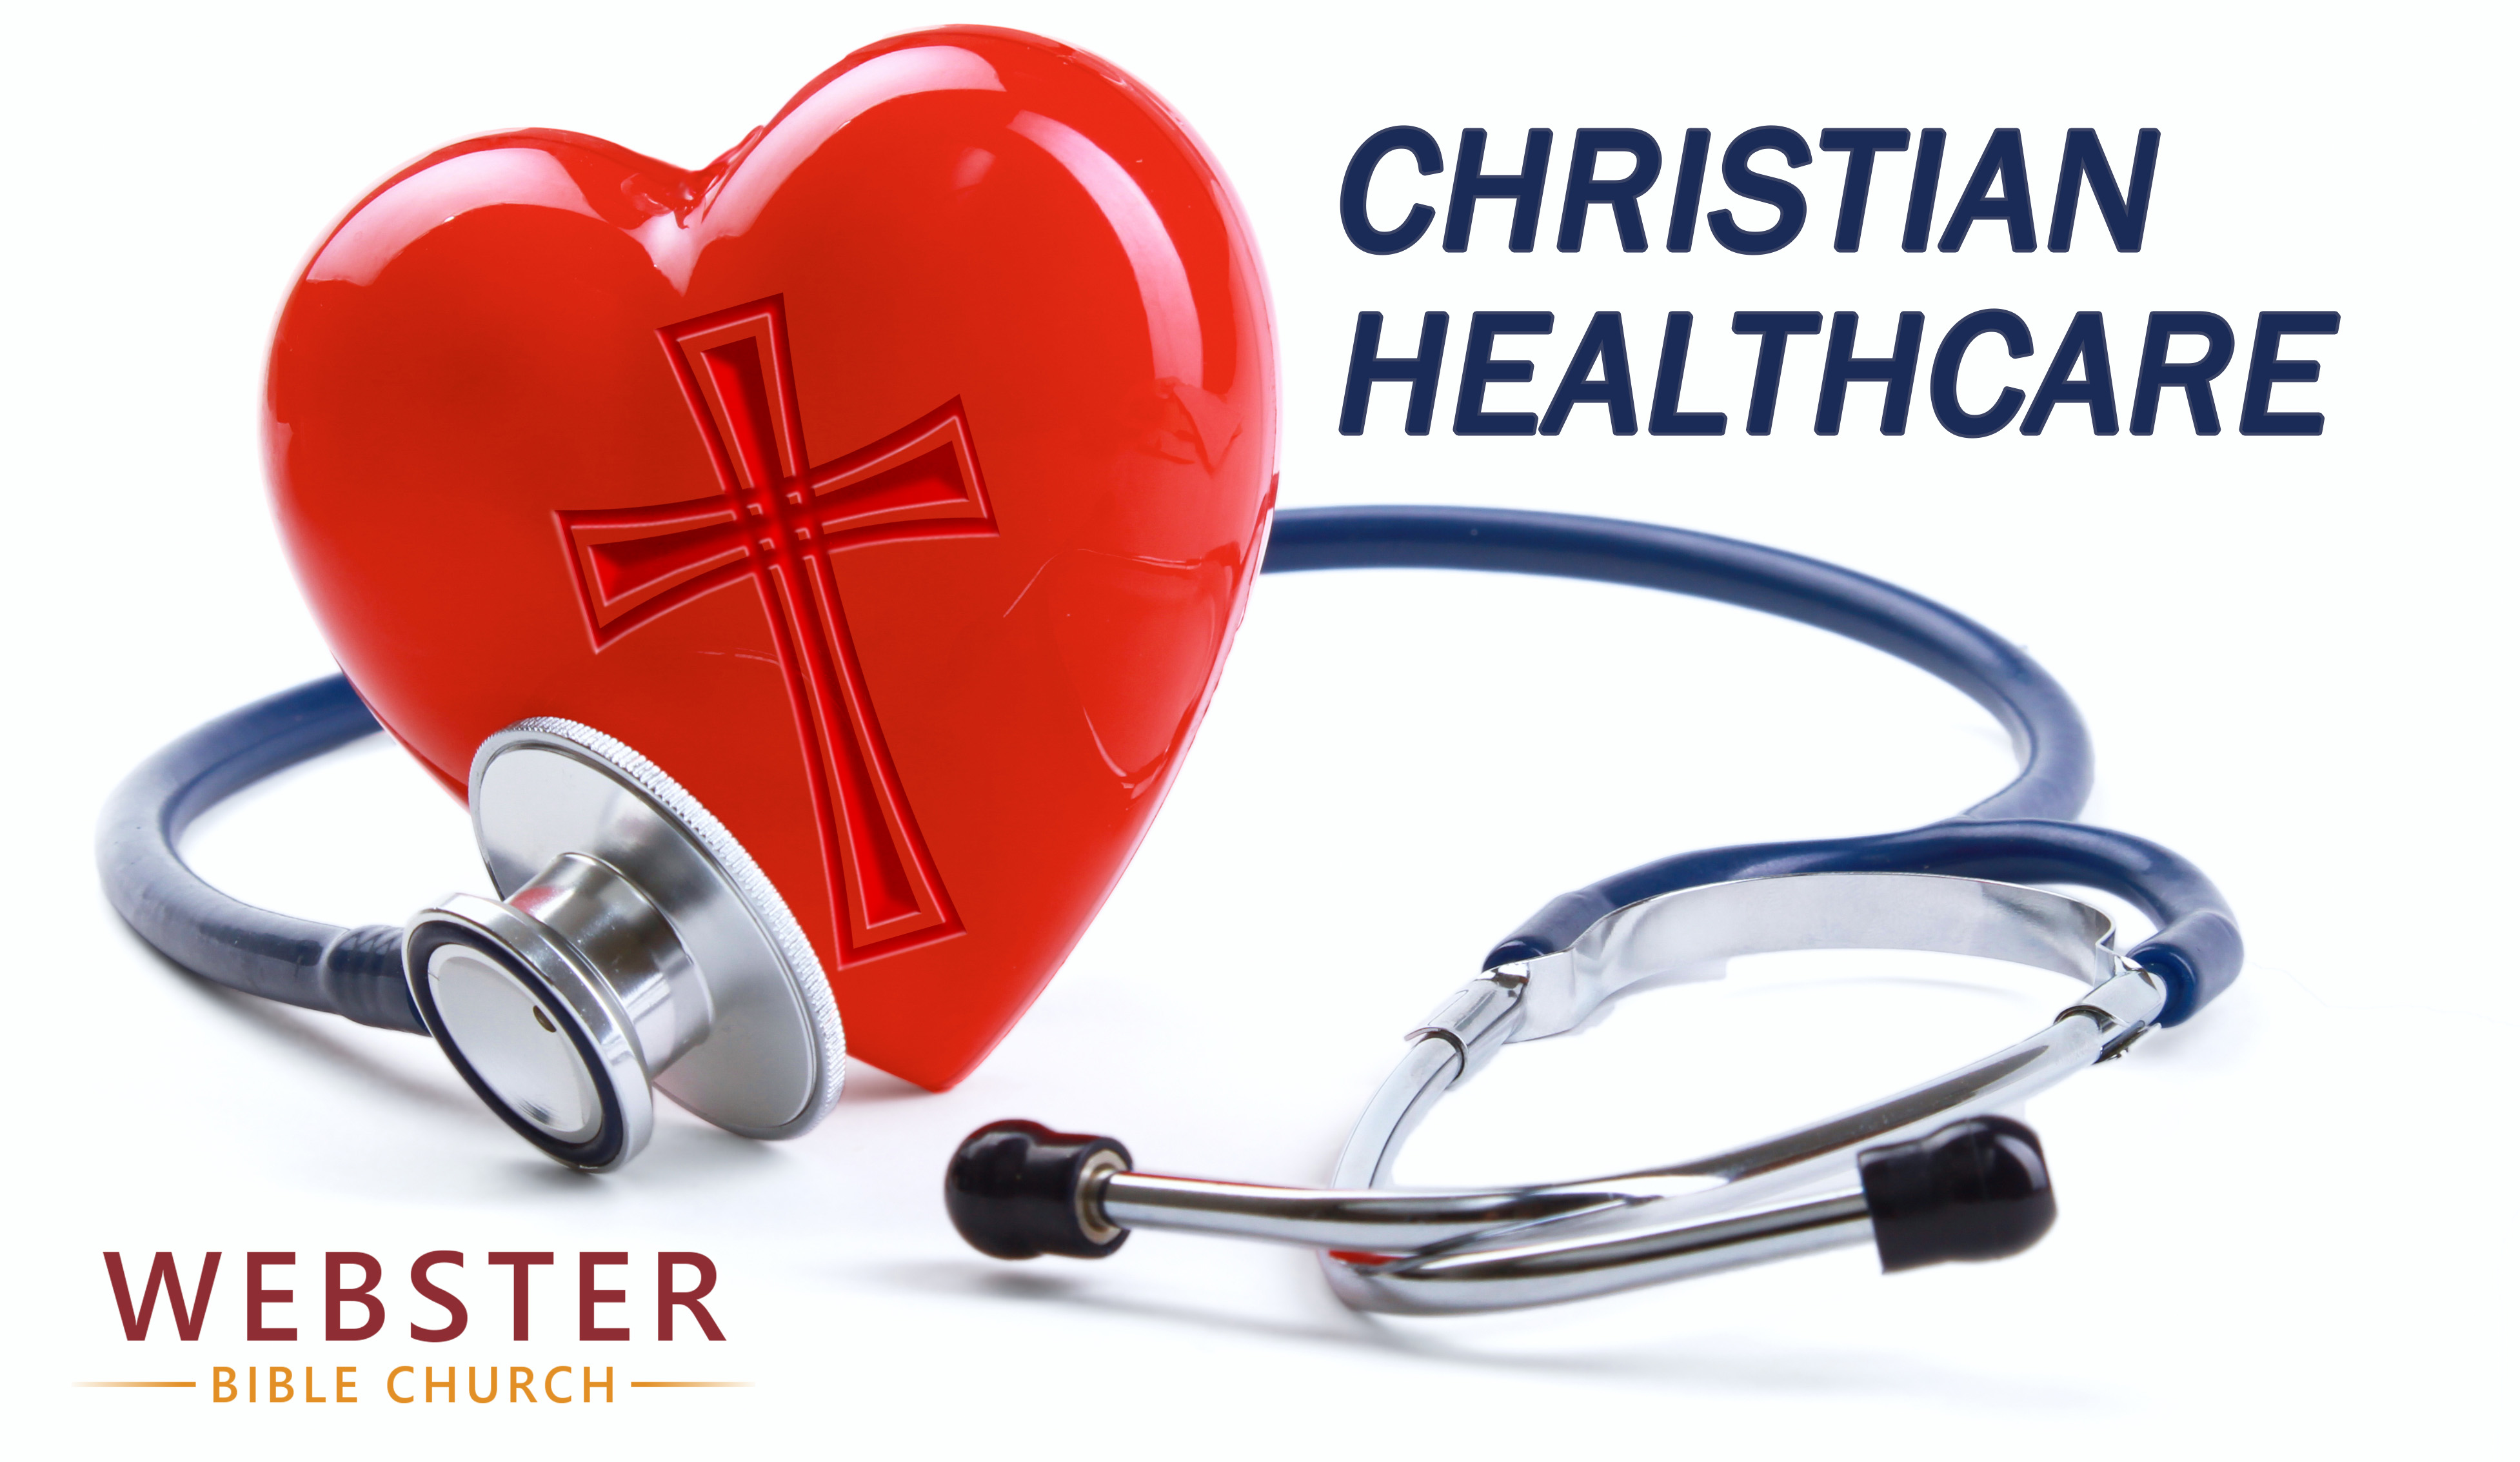 Christian Healthcare - Diagnostic Question #10: Do You Have a Growing Concern for the Spiritual and Temporal Needs of Others?